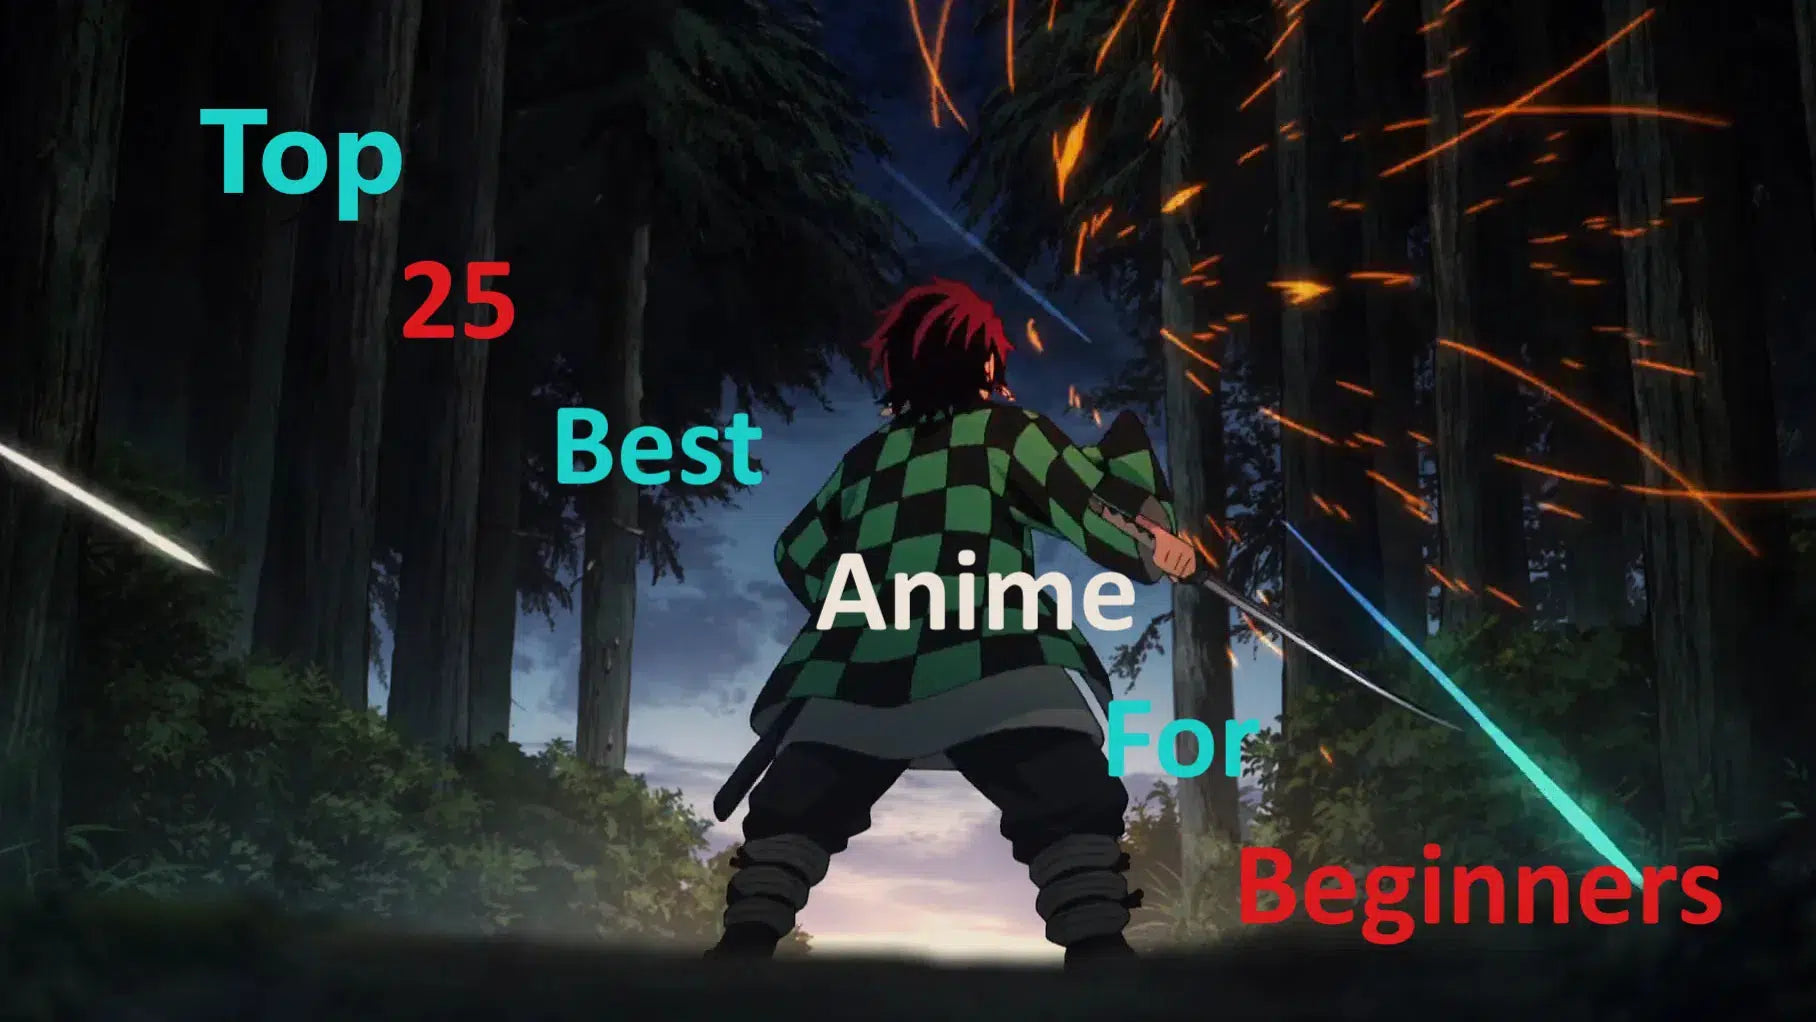 Anime | Top 25 Best Anime For Beginners | The Definitive List!